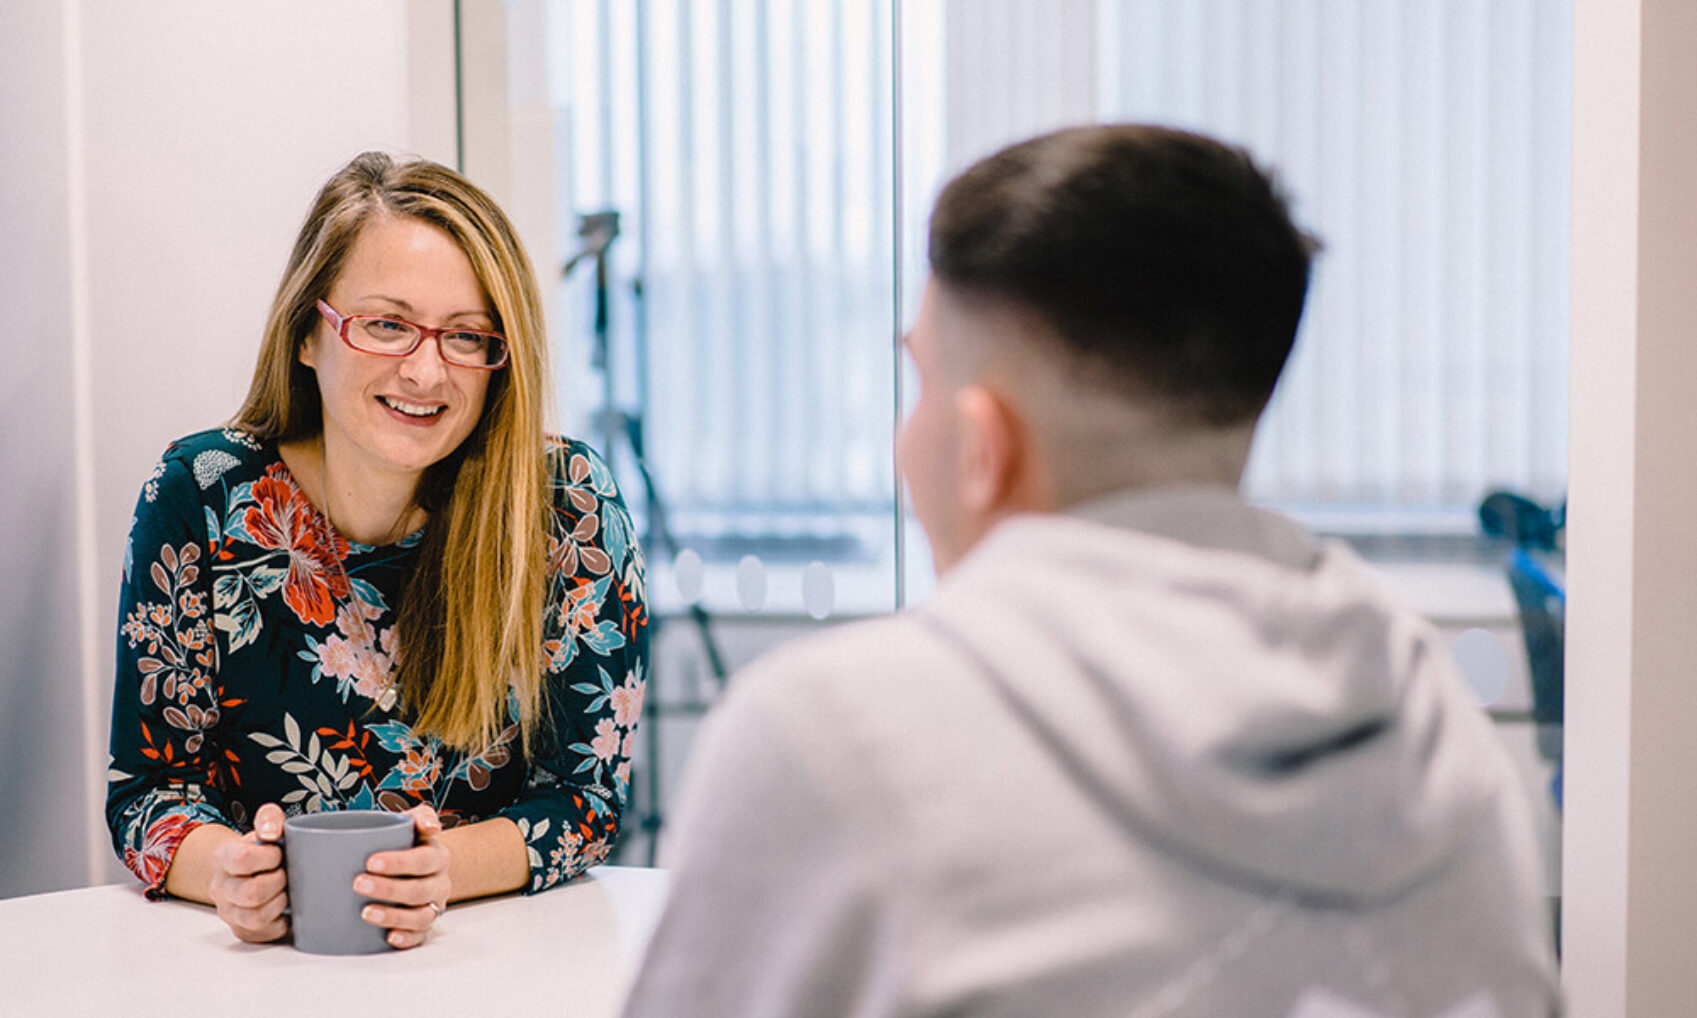 FlyForm's Engagement Manager, Emma Wilcox, speaks to a colleague over a cup of coffee.